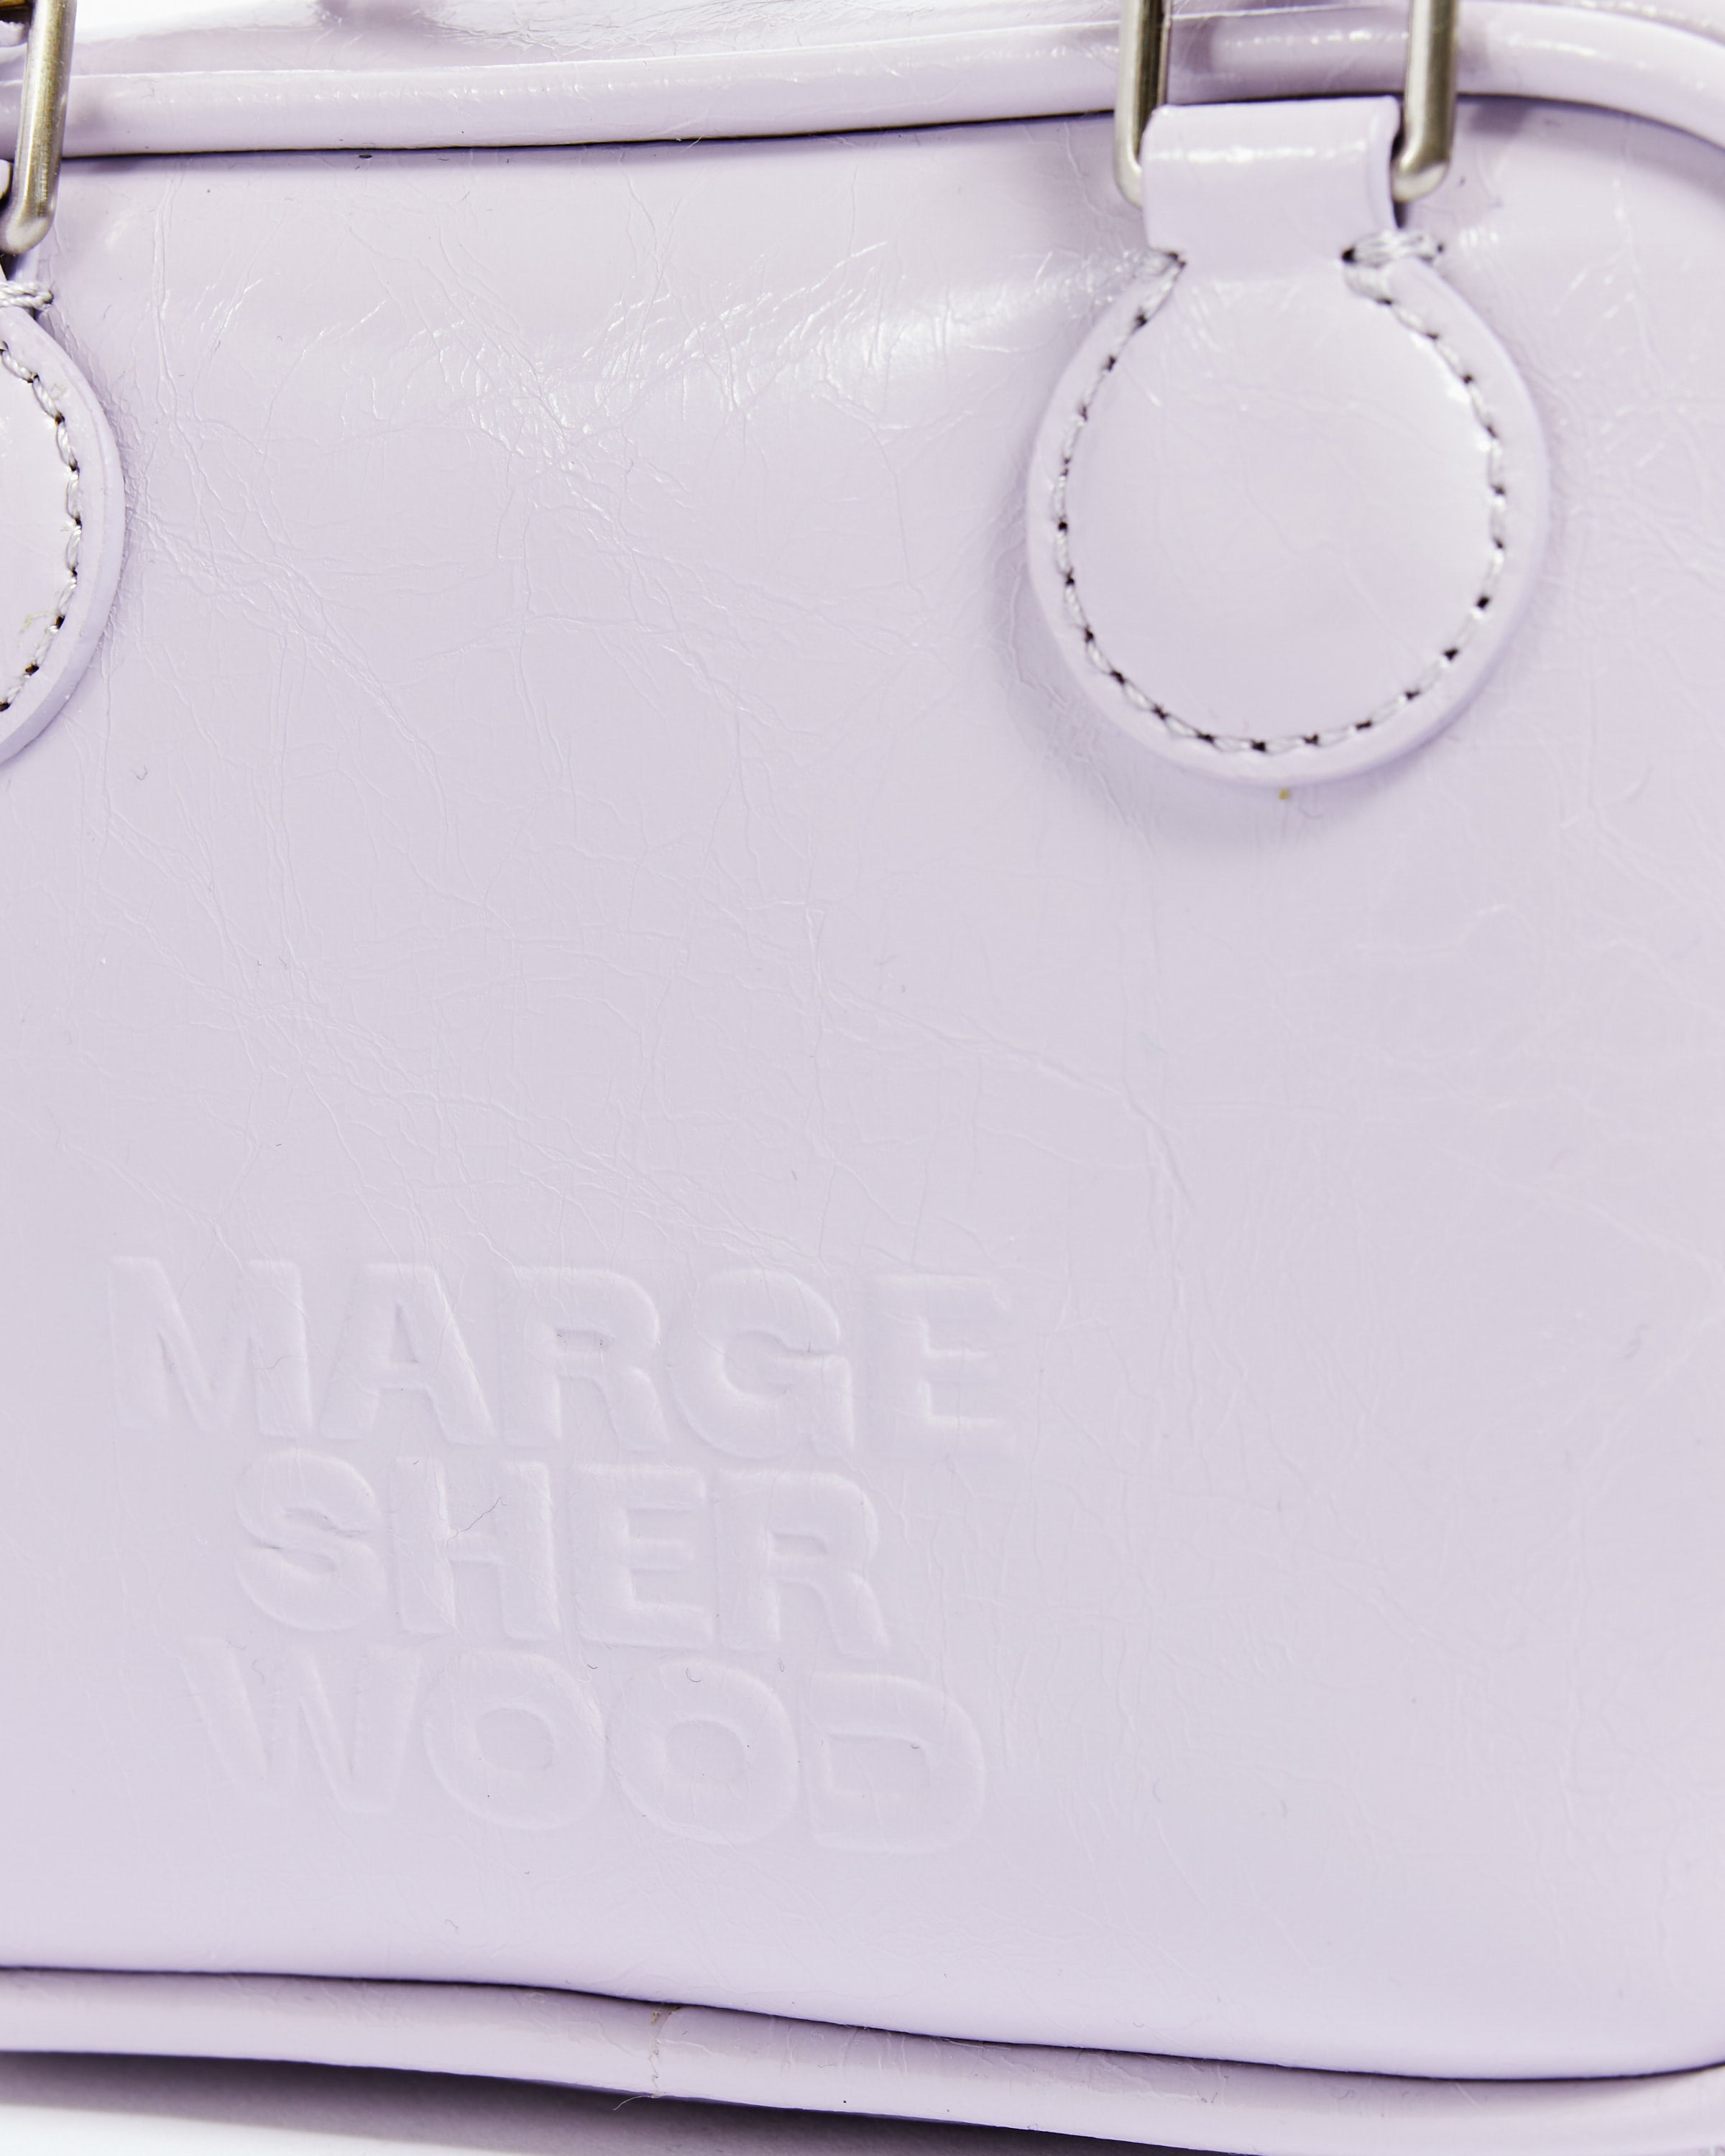 Shop MARGE SHERWOOD Shoulder Bags by Seoul_Channel